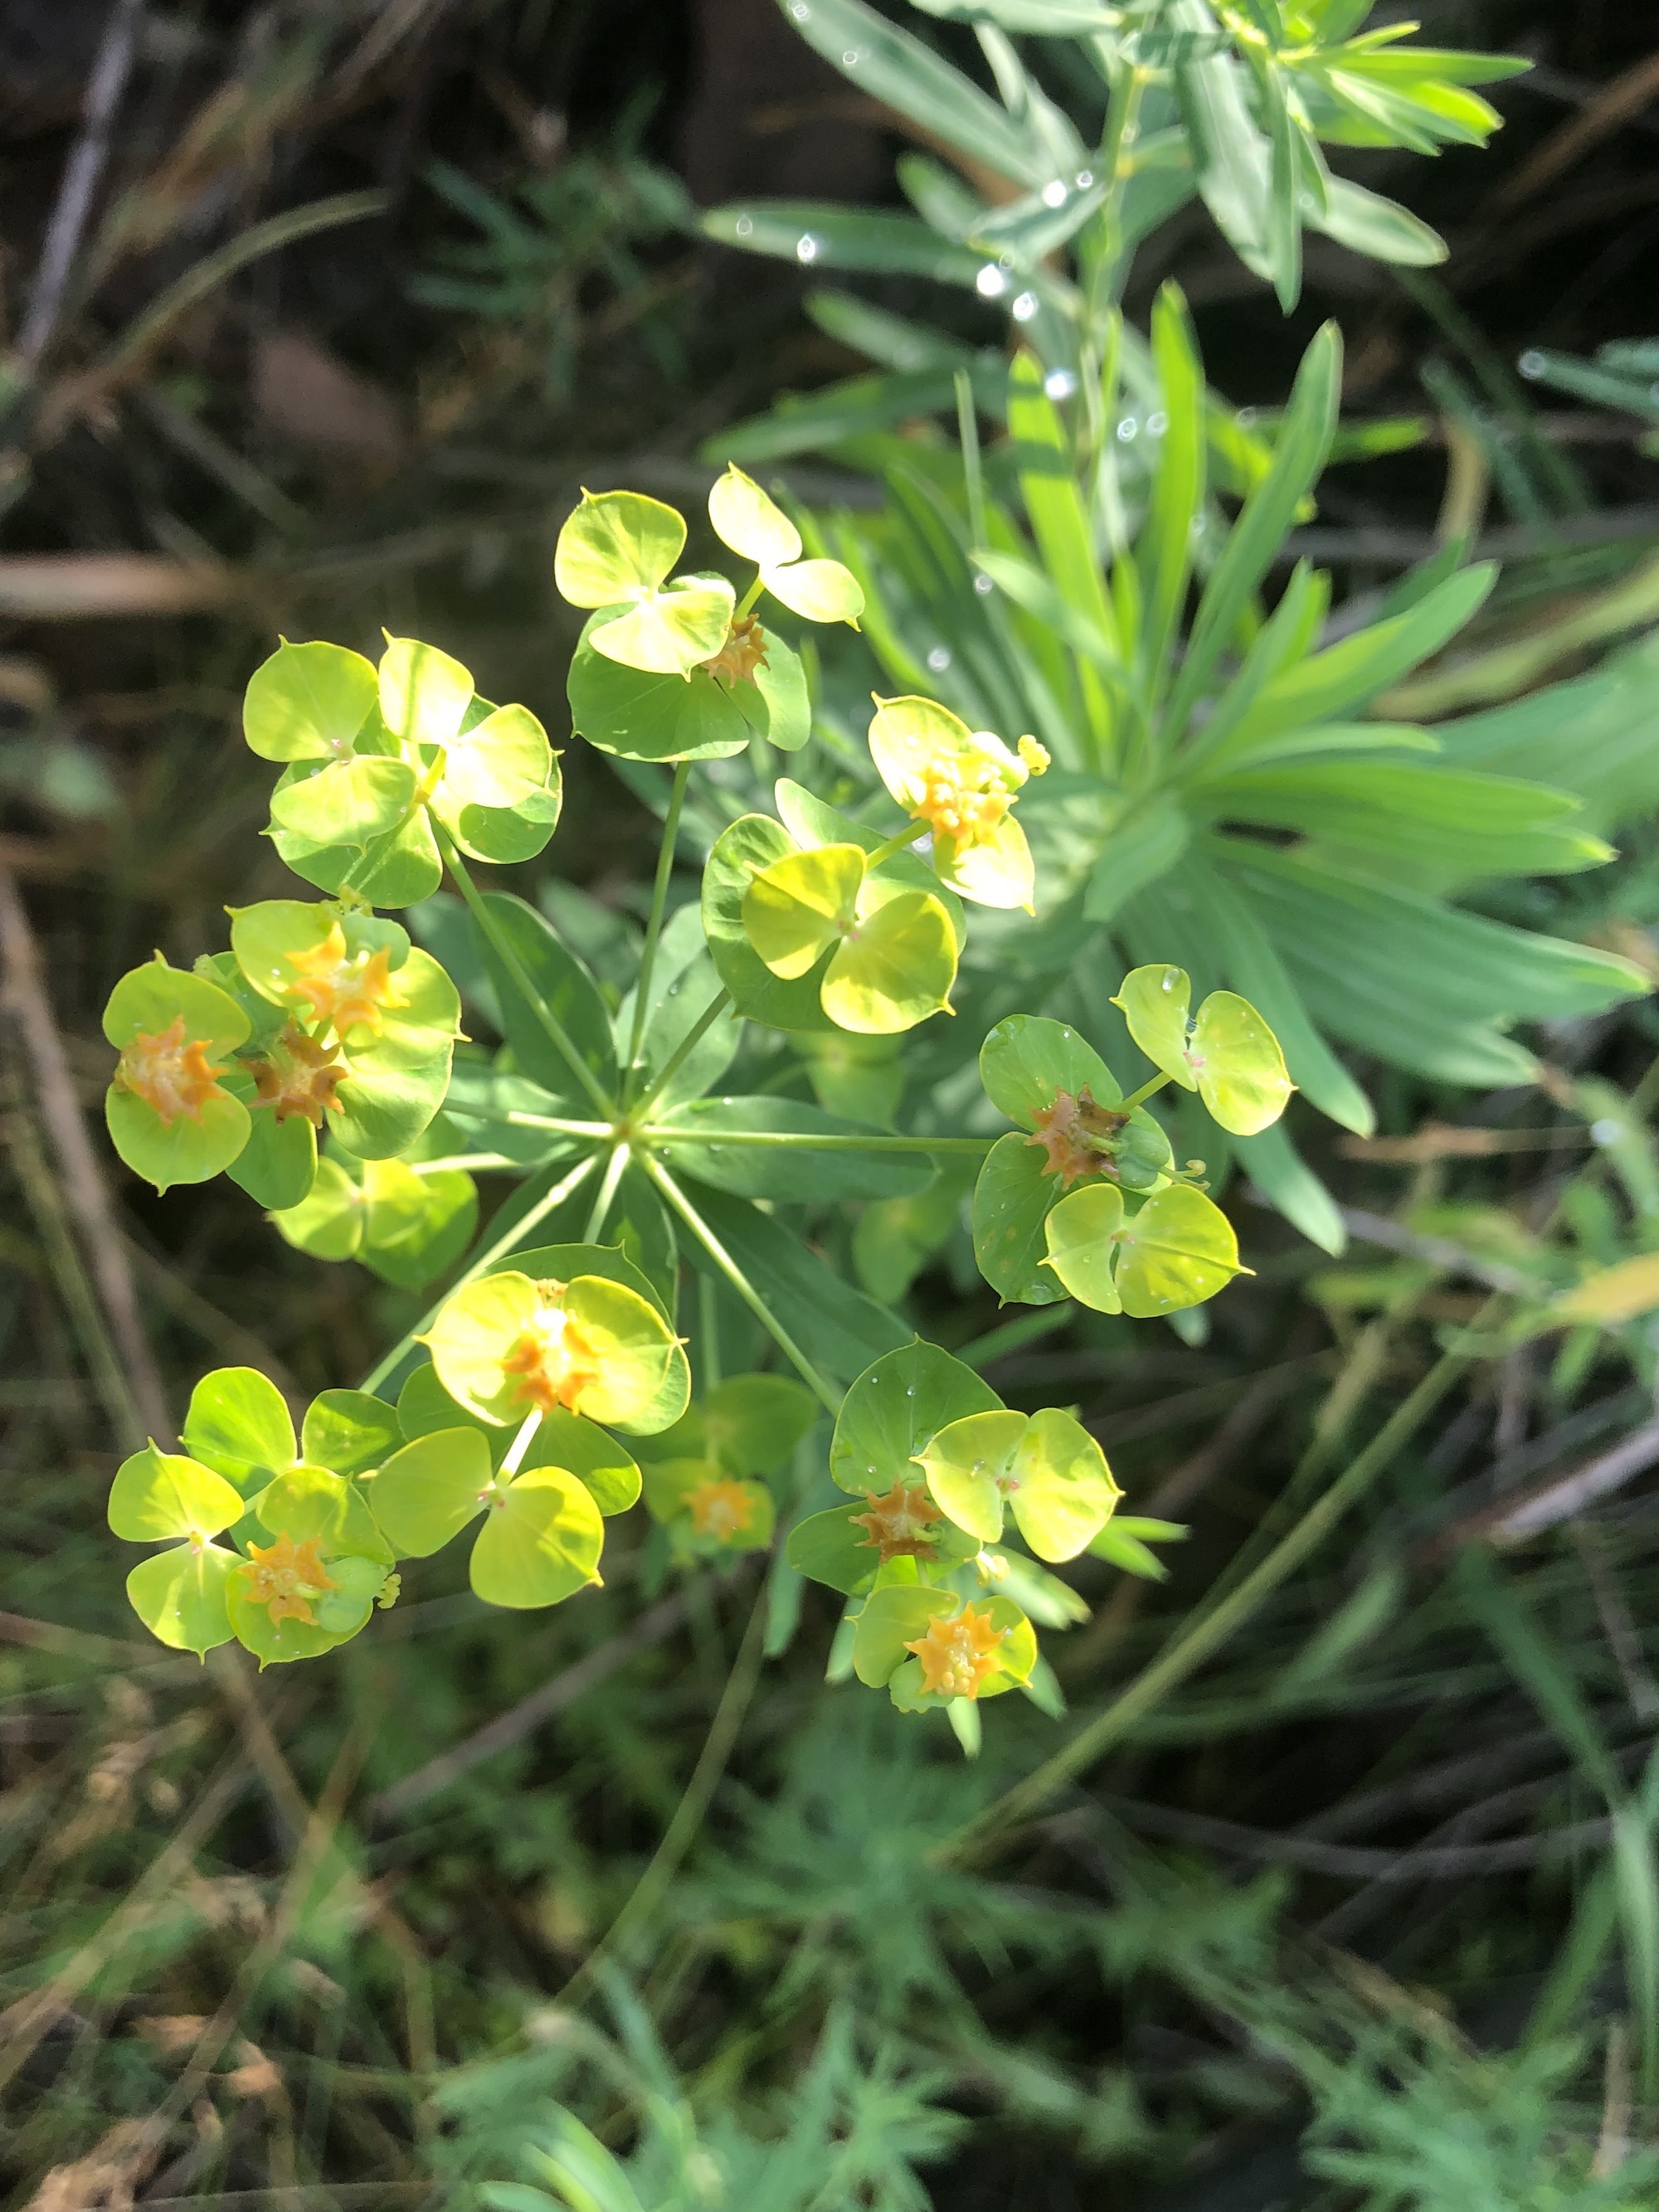 Leafy Spurge around Marion Dunn Pond in Madison, Wisconsin on June 18, 2021.